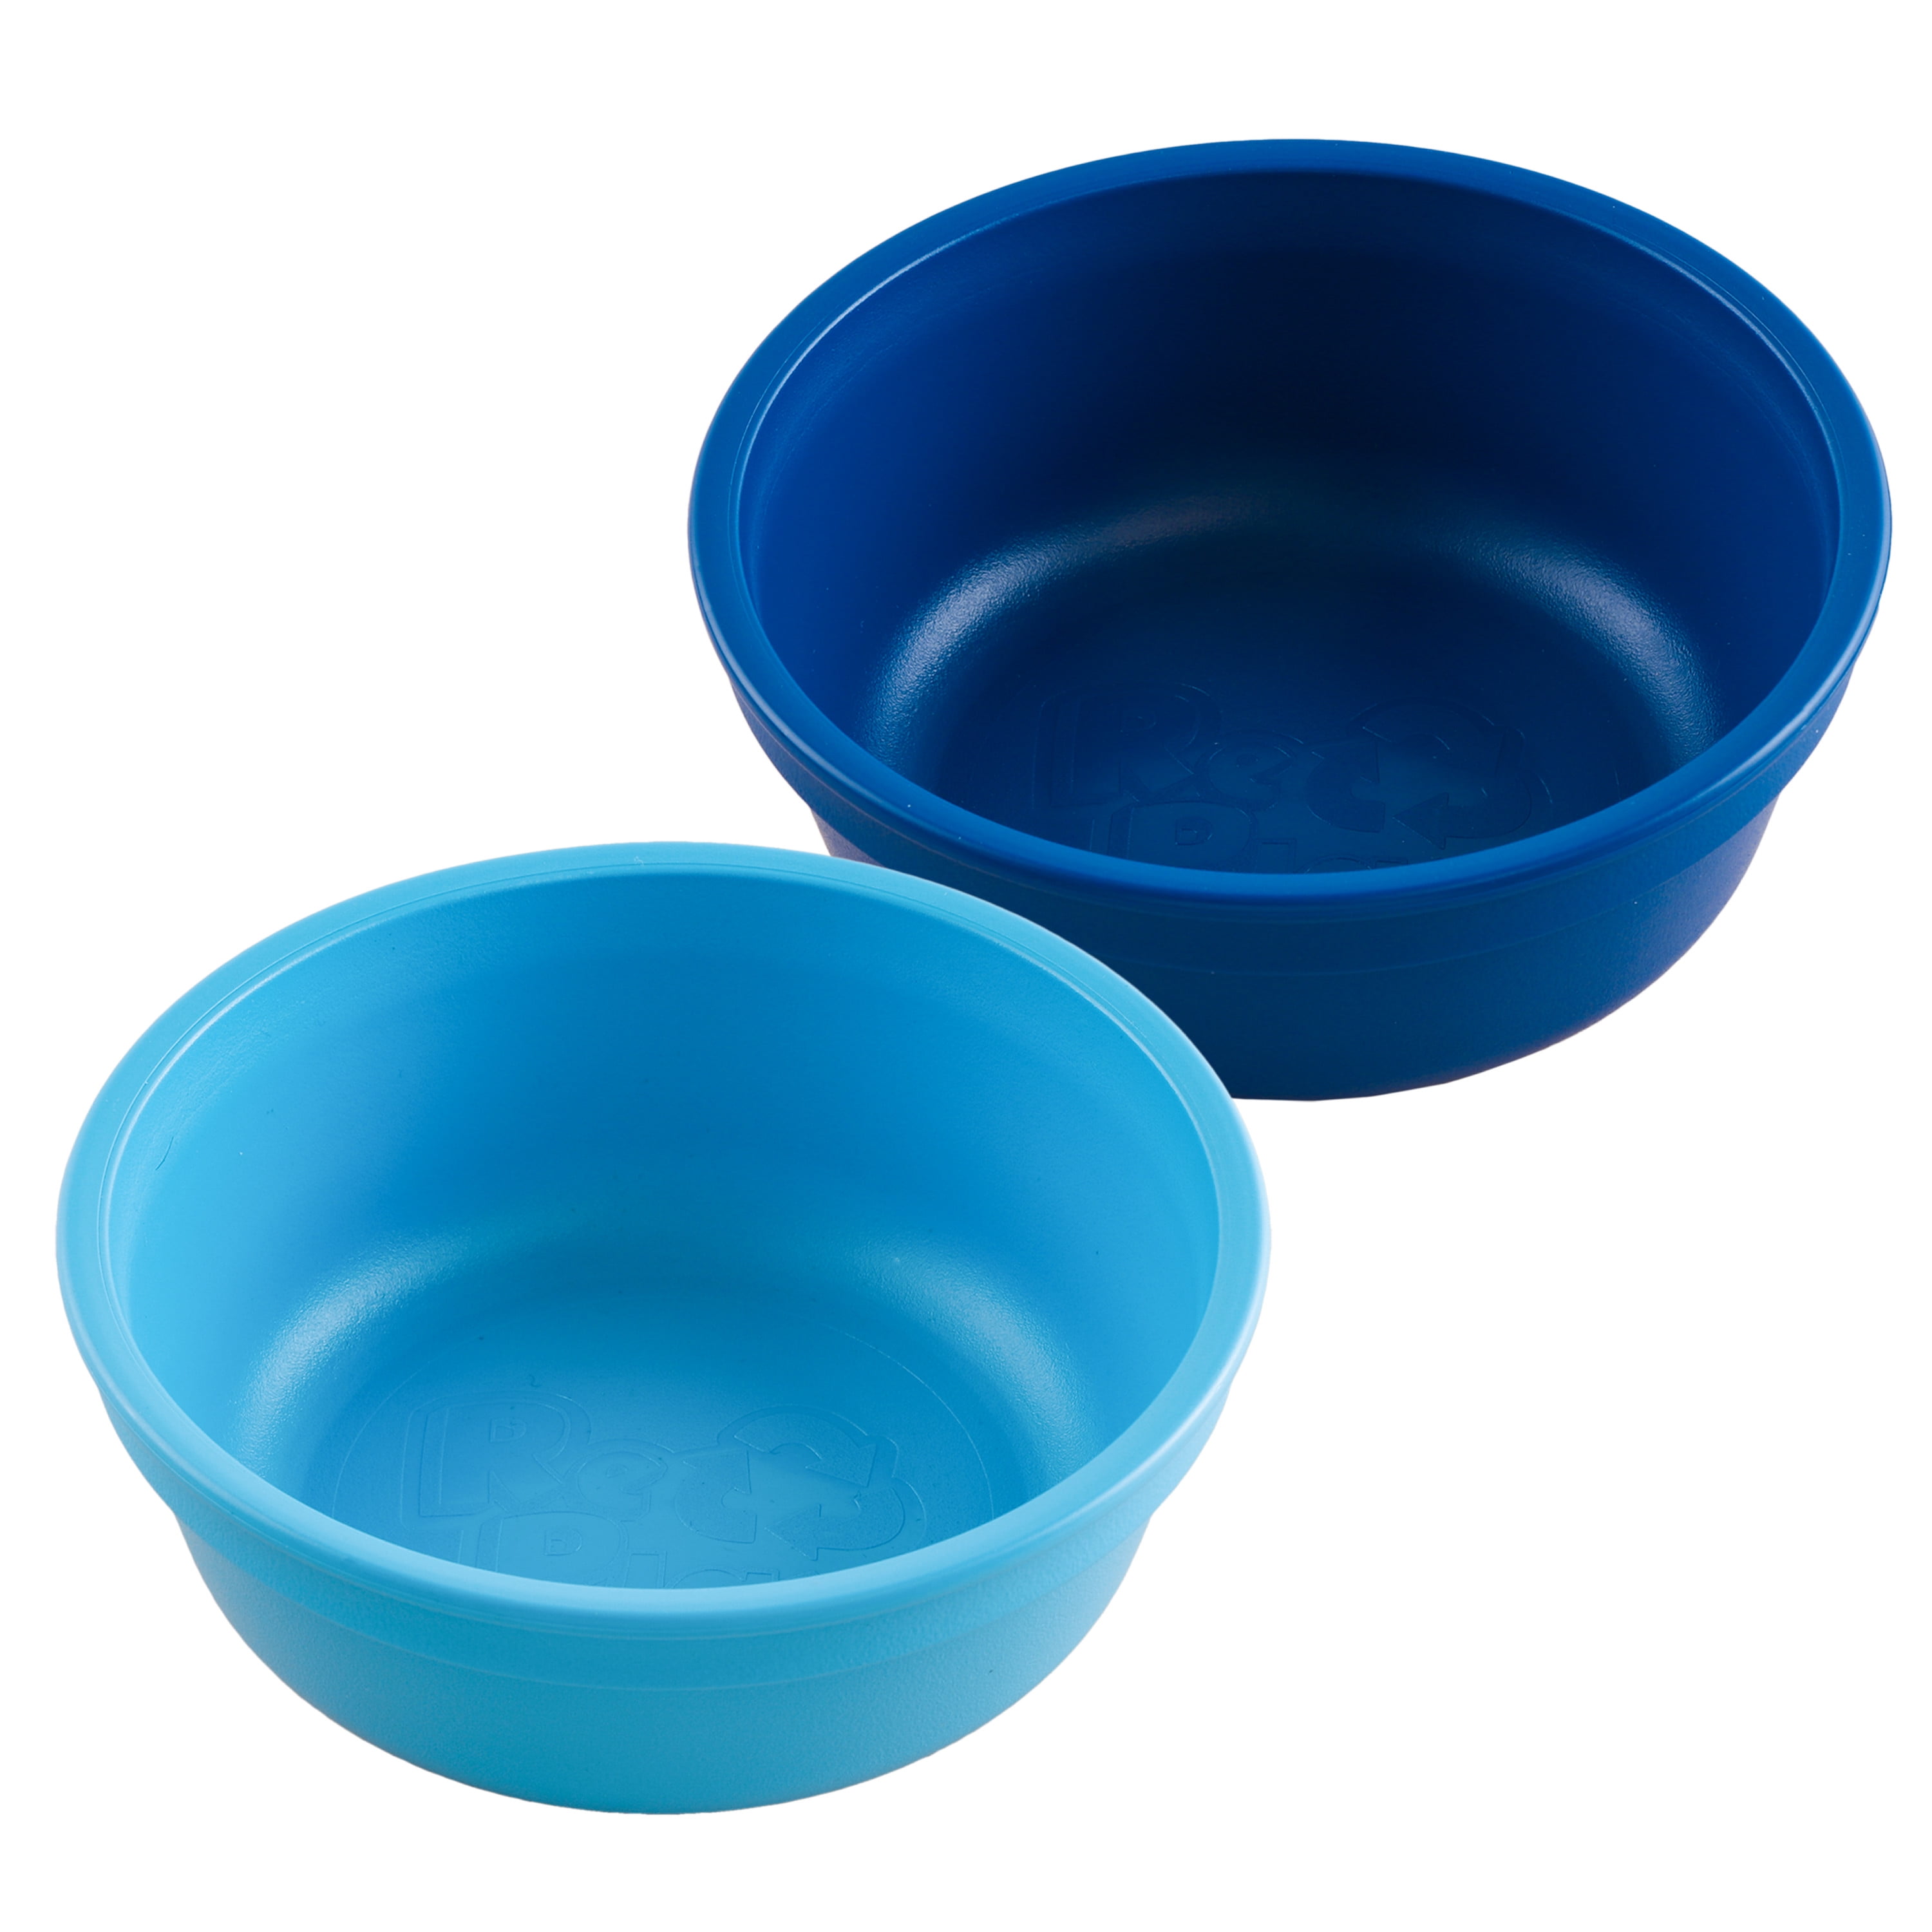 Re Play Made in USA 12 Oz. Reusable Plastic Bowls, Pack of 4 With 1 Lid -  Dishwasher and Microwave Safe Bowls with Lids for Everyday Dining - Toddler